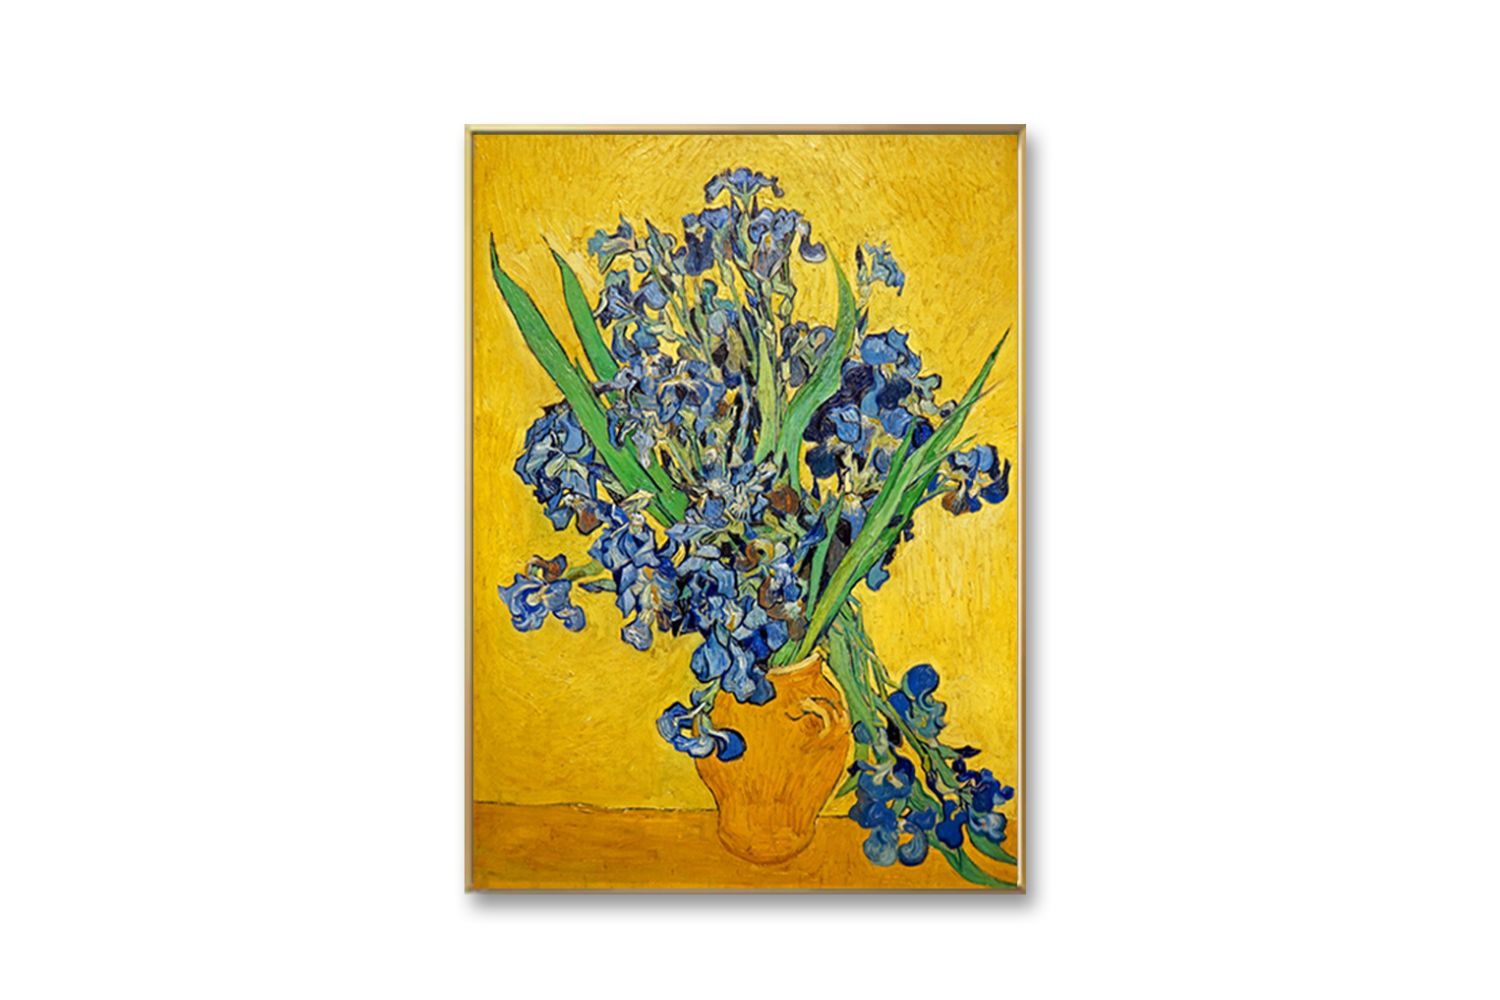 STILL LIFE WITH IRISES By Vincent Van Gogh - Golden Framed Canvas Print ...